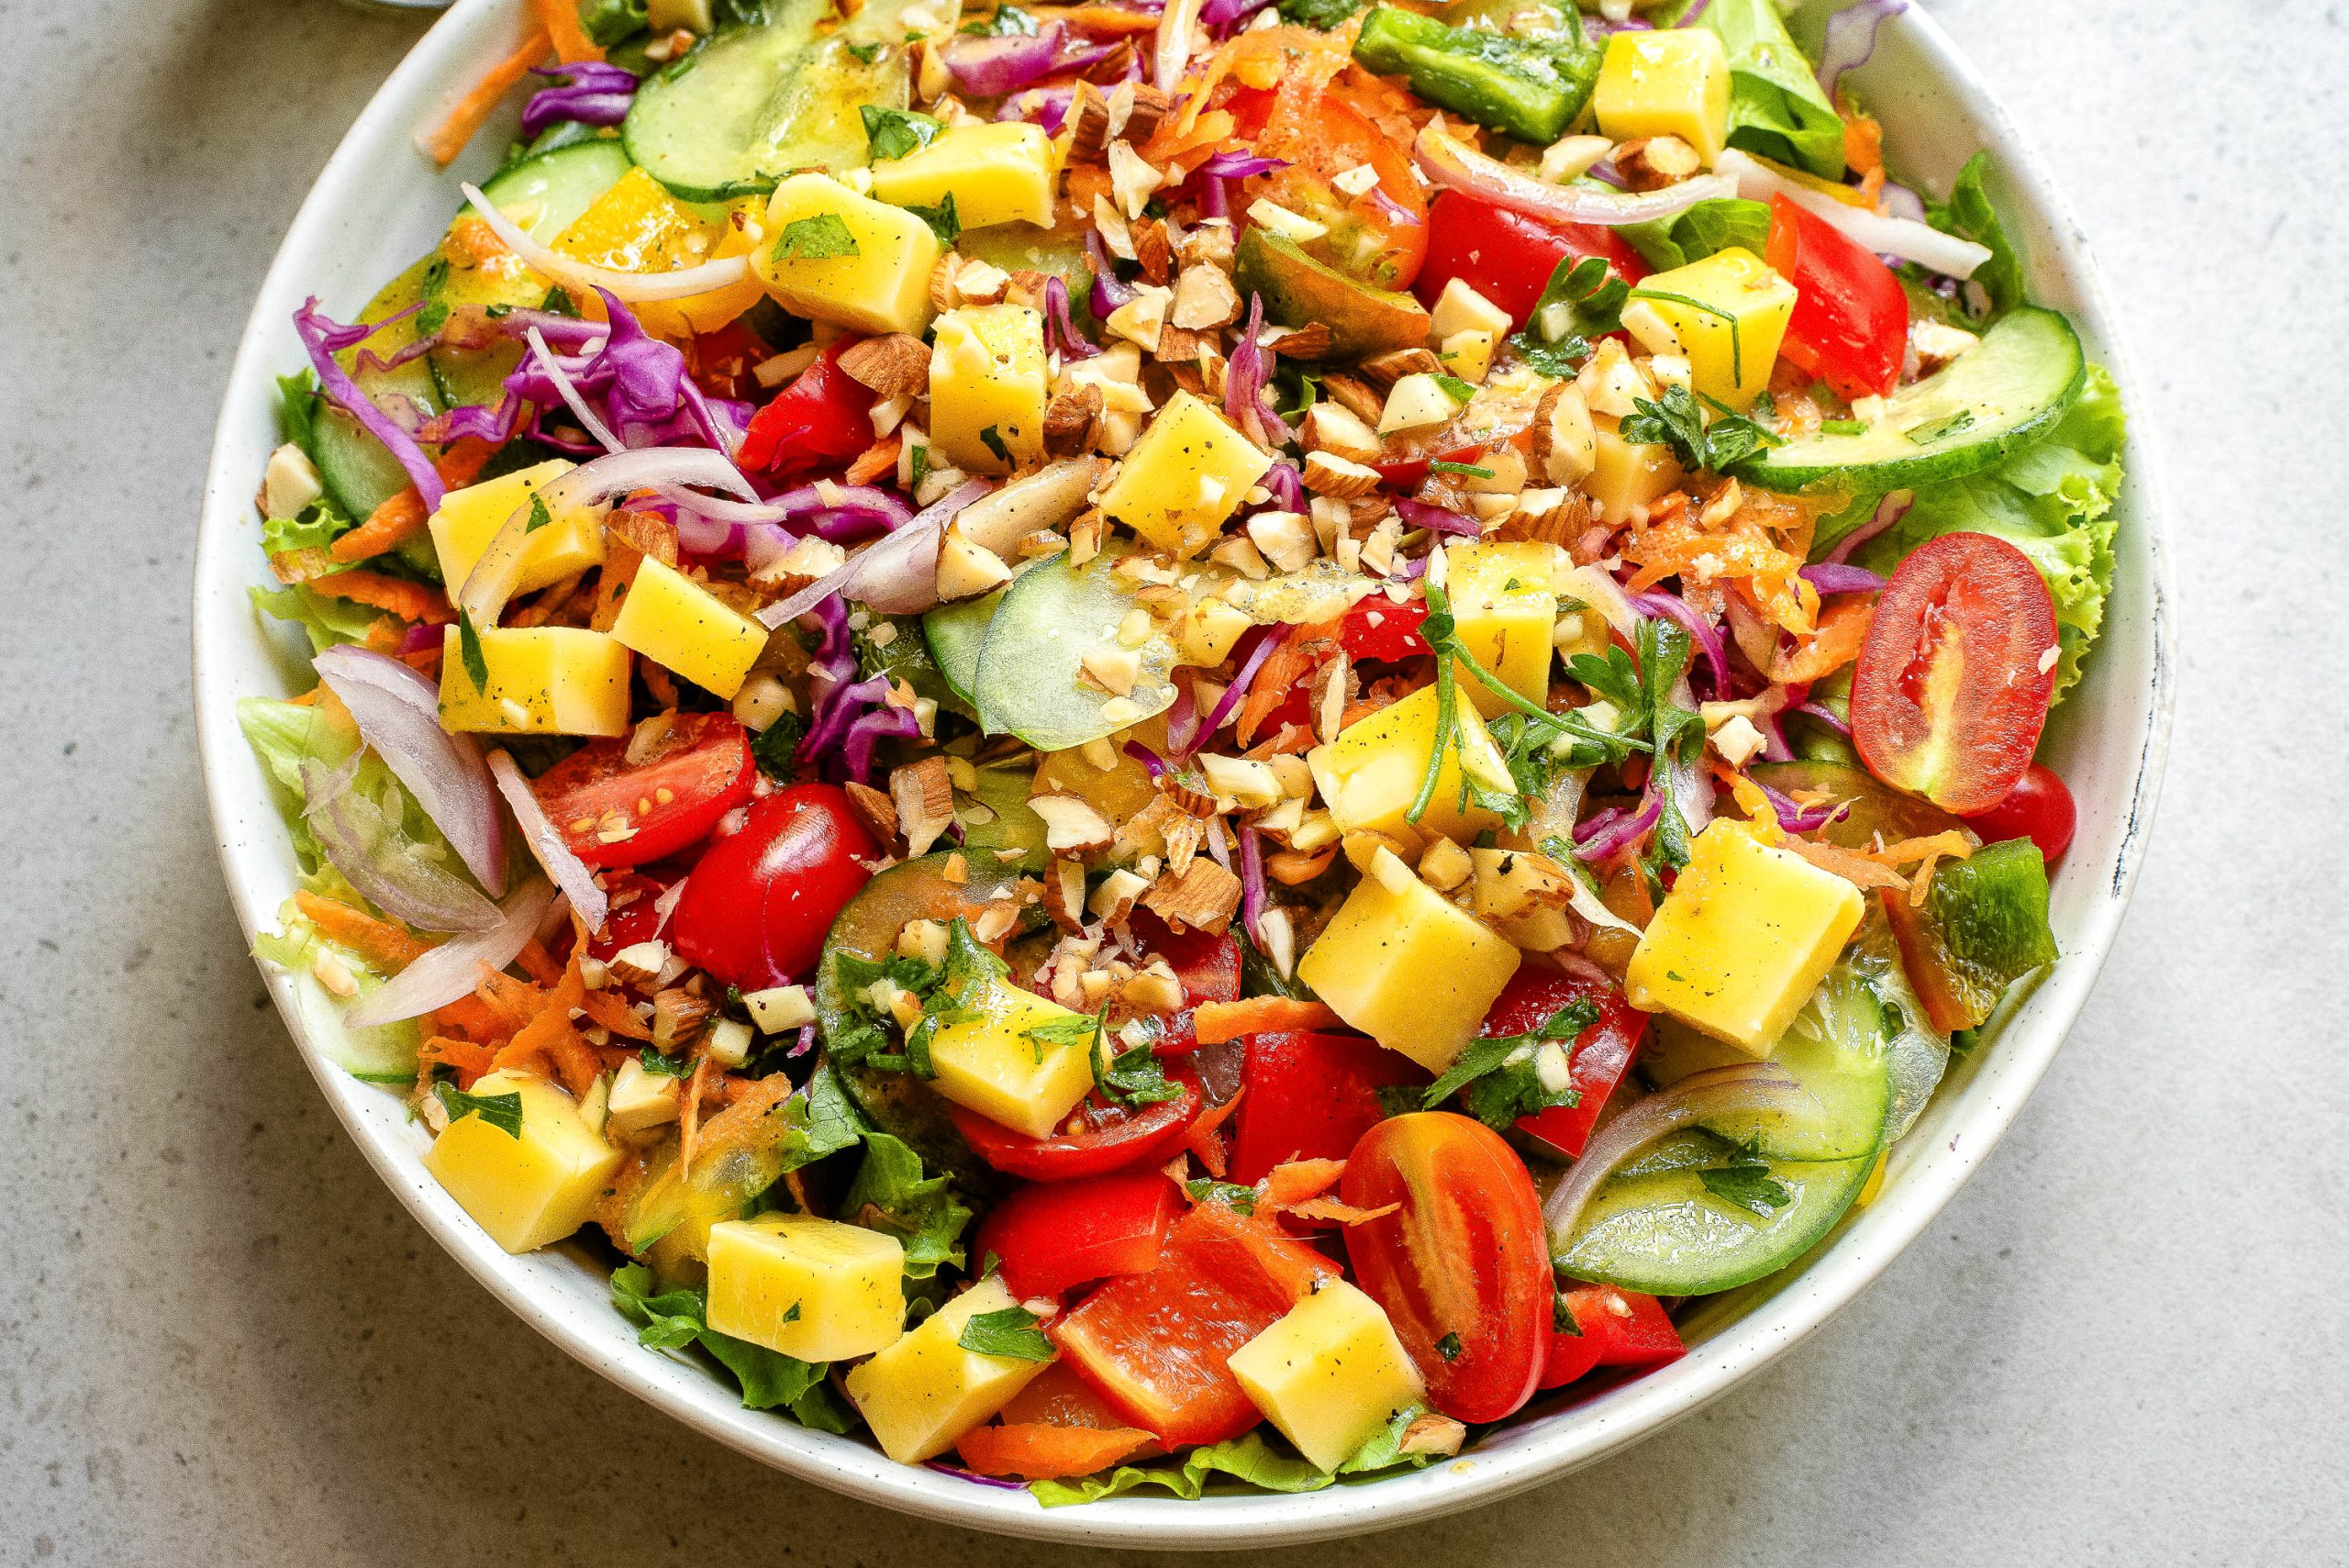 A colorful salad in a white bowl featuring mixed greens, cherry tomatoes, cucumber slices, diced mango, shredded carrots, purple cabbage, chopped nuts, and herbs.